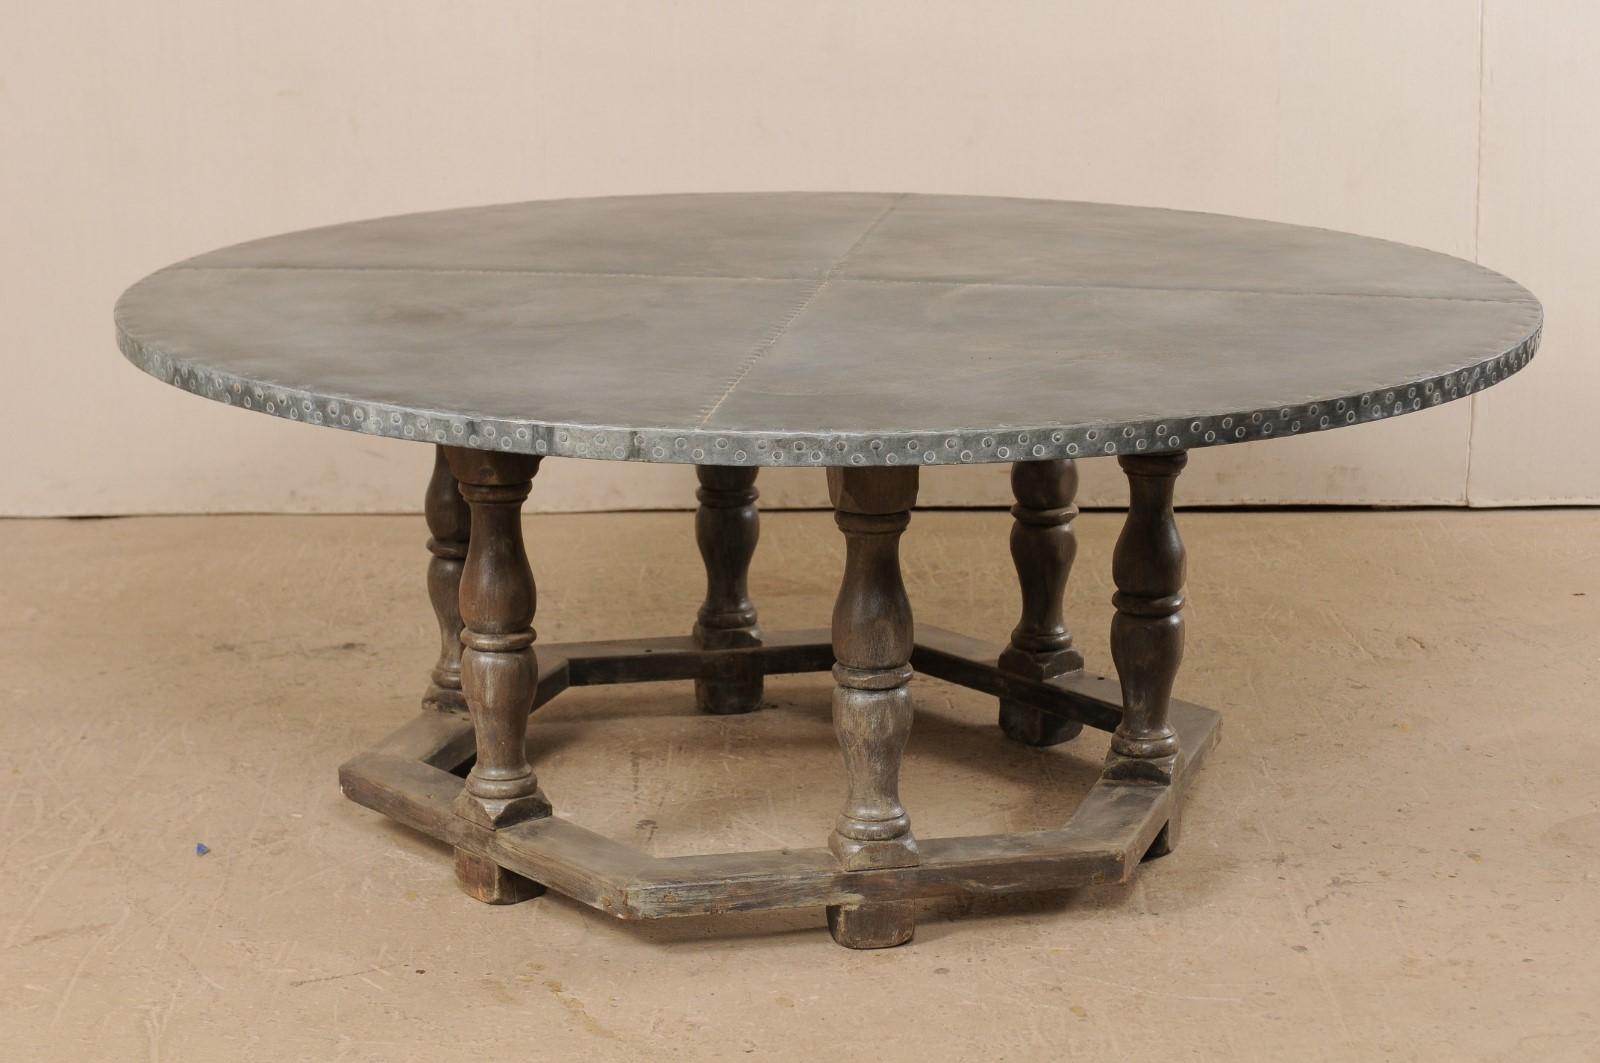 An American painted wood round-shaped dining table with zinc top. This fabulous custom table has been fashioned from the base of an old 1940s school table, with the addition of a newer zinc top. The hexagon-shaped base is comprised of six